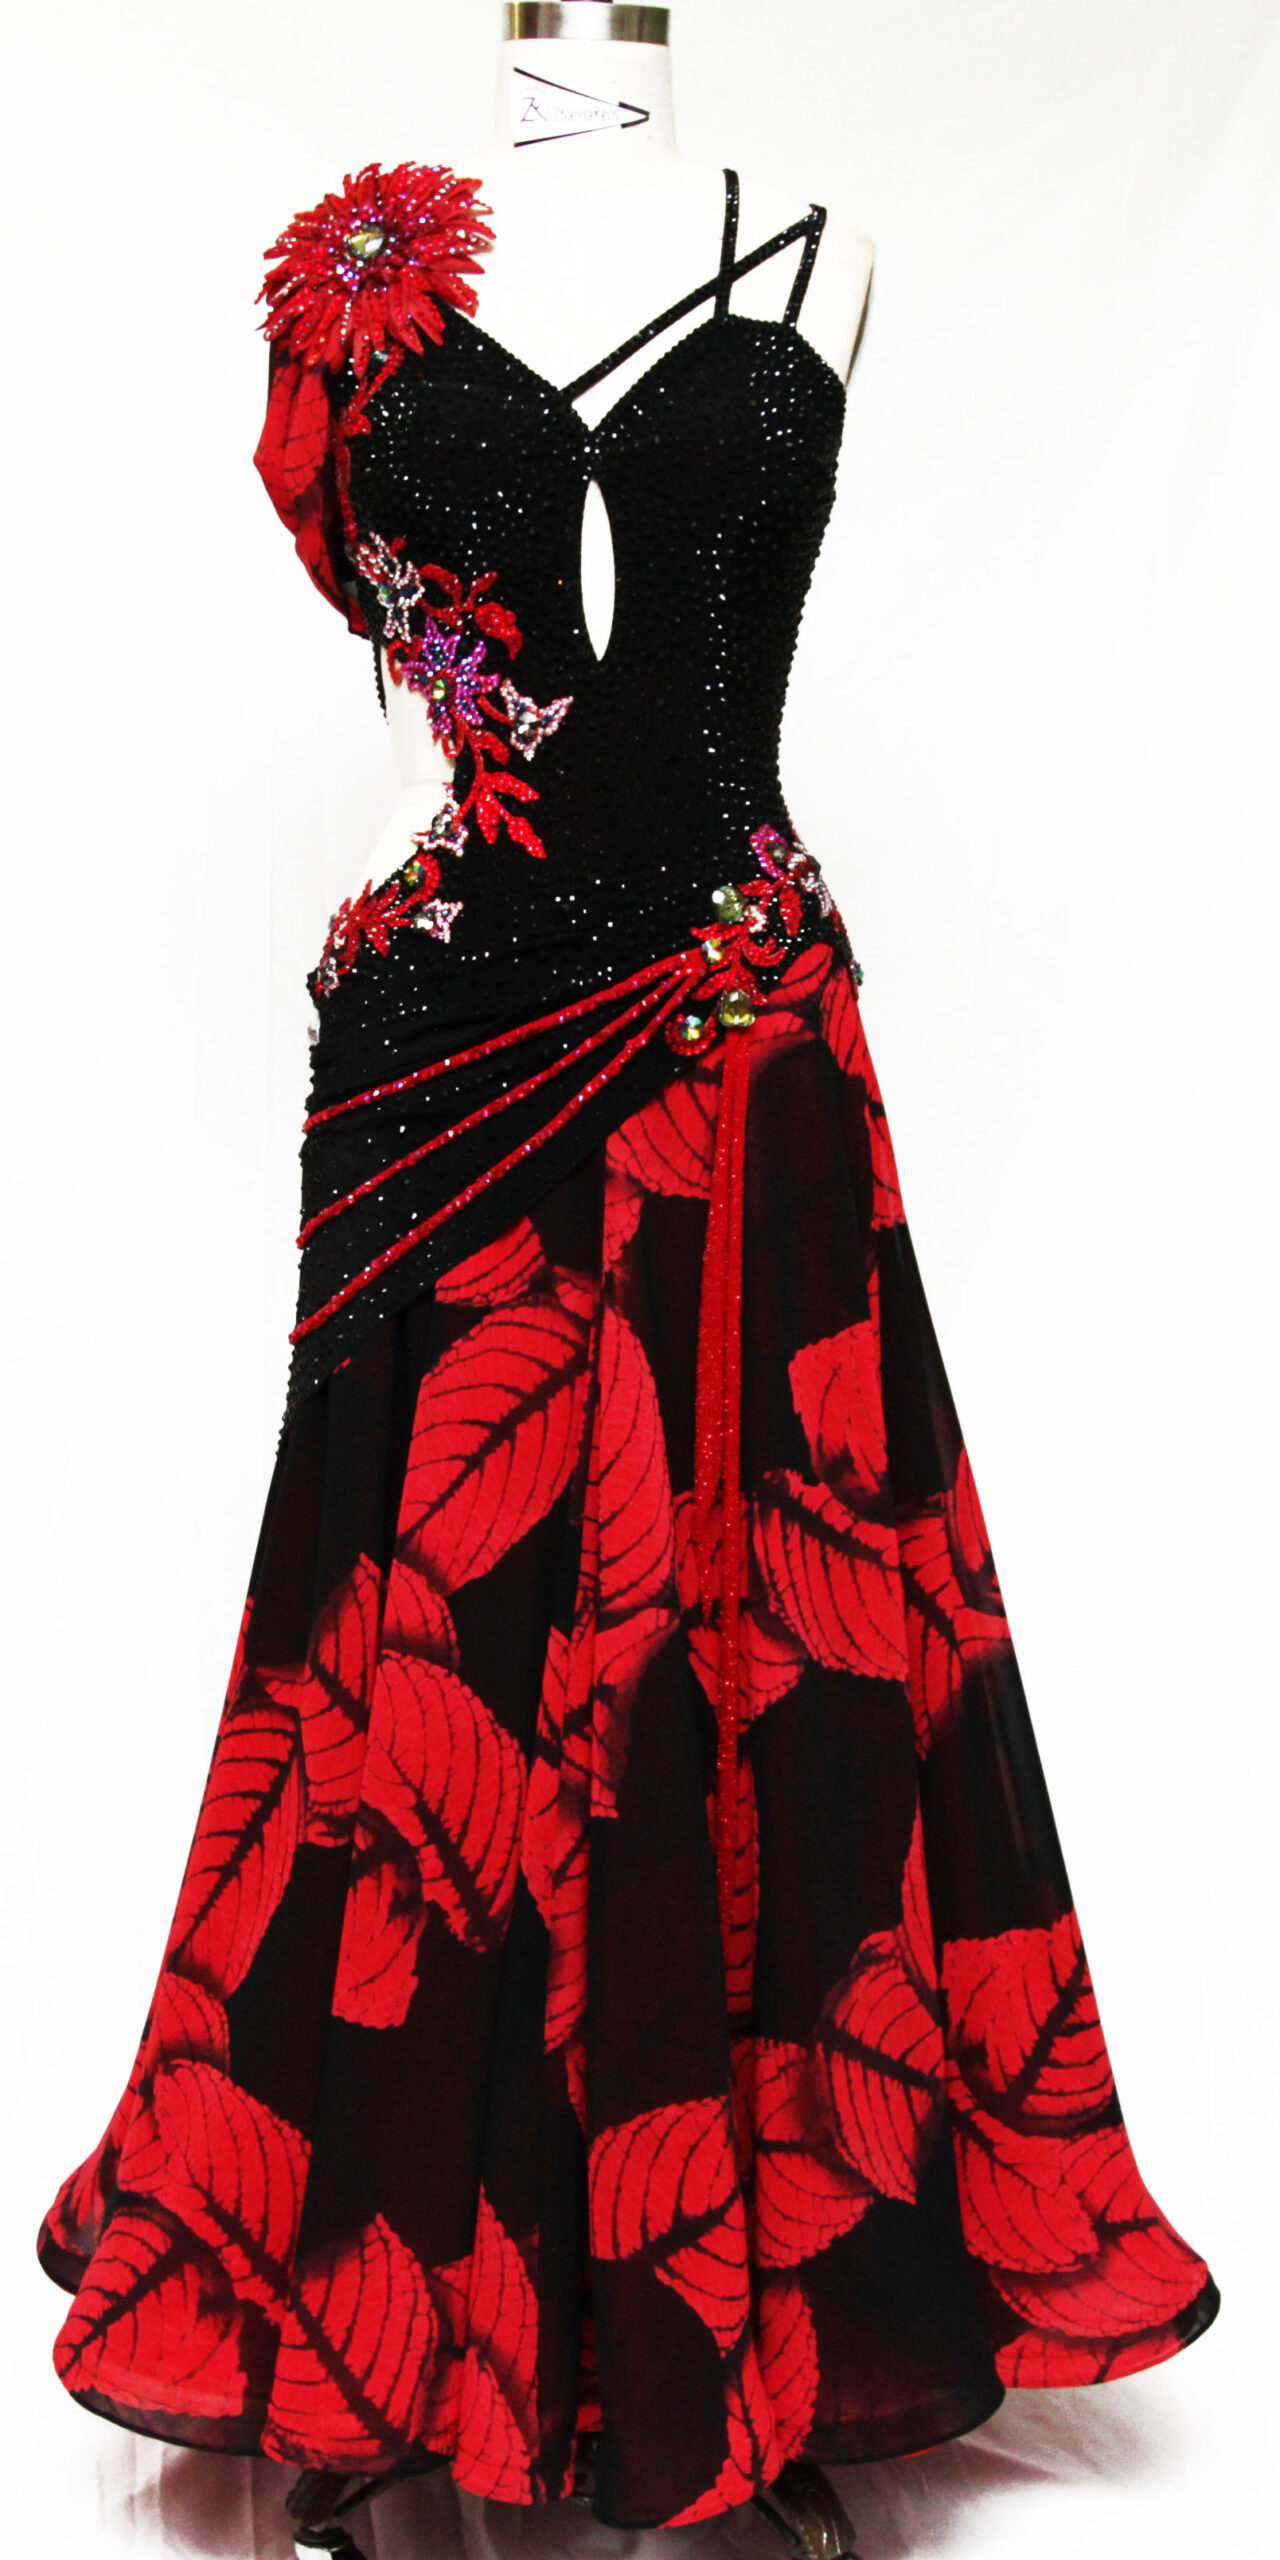 standard ballroom dress for competition